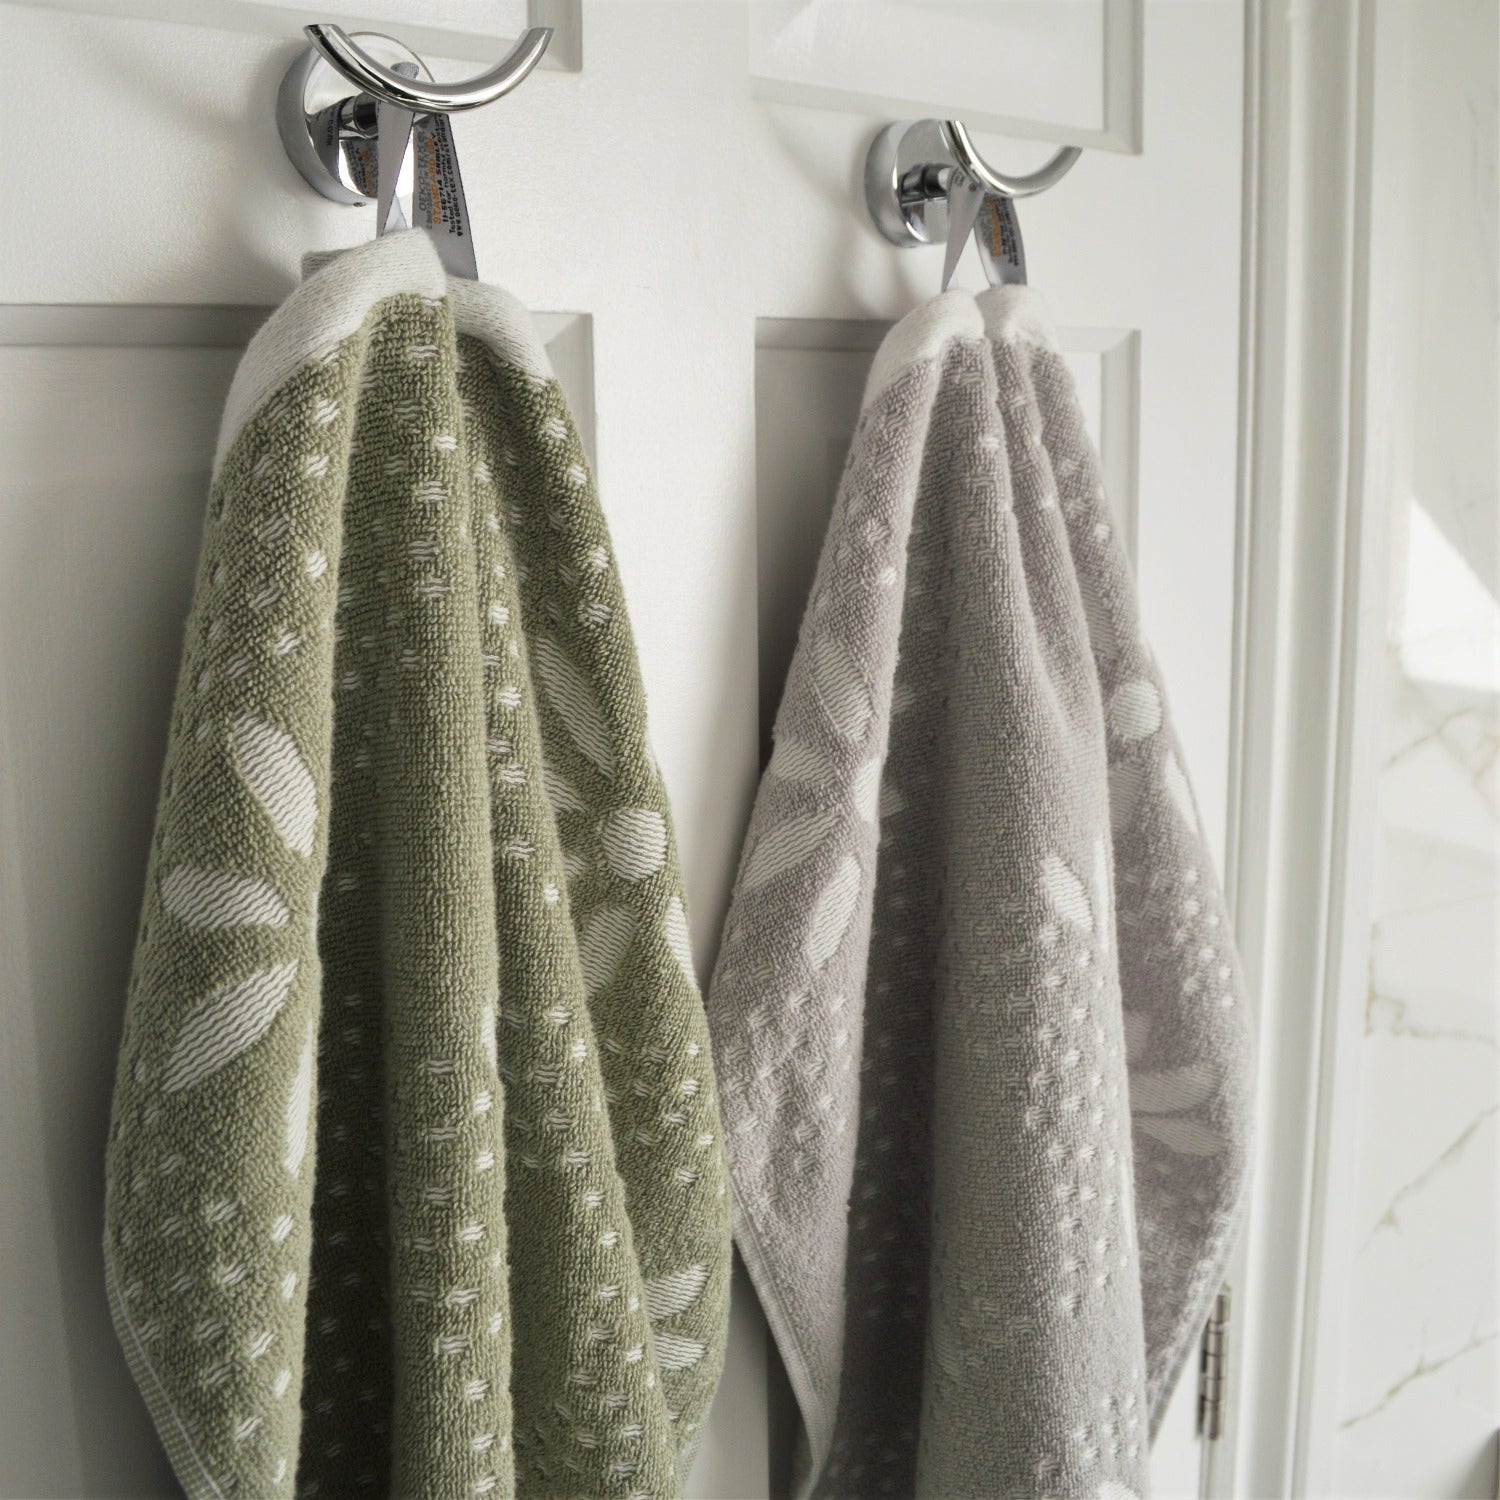 Marrakesh Towels hung on a hook using hanging loops